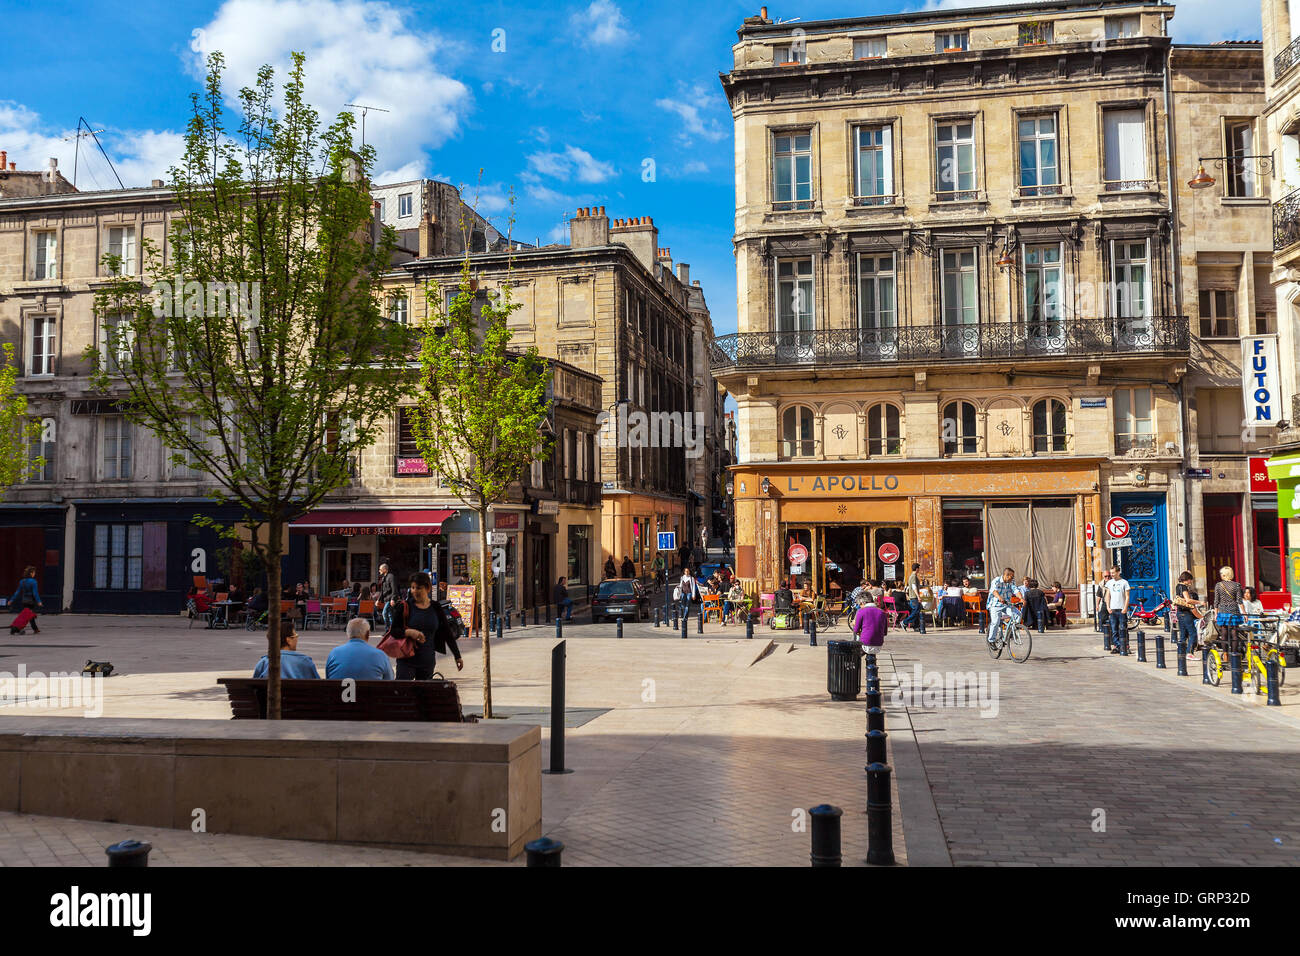 BORDEAUX, FRANCE - APRIL 4, 2011: French people walking at streets of old city with ancient homes Stock Photo